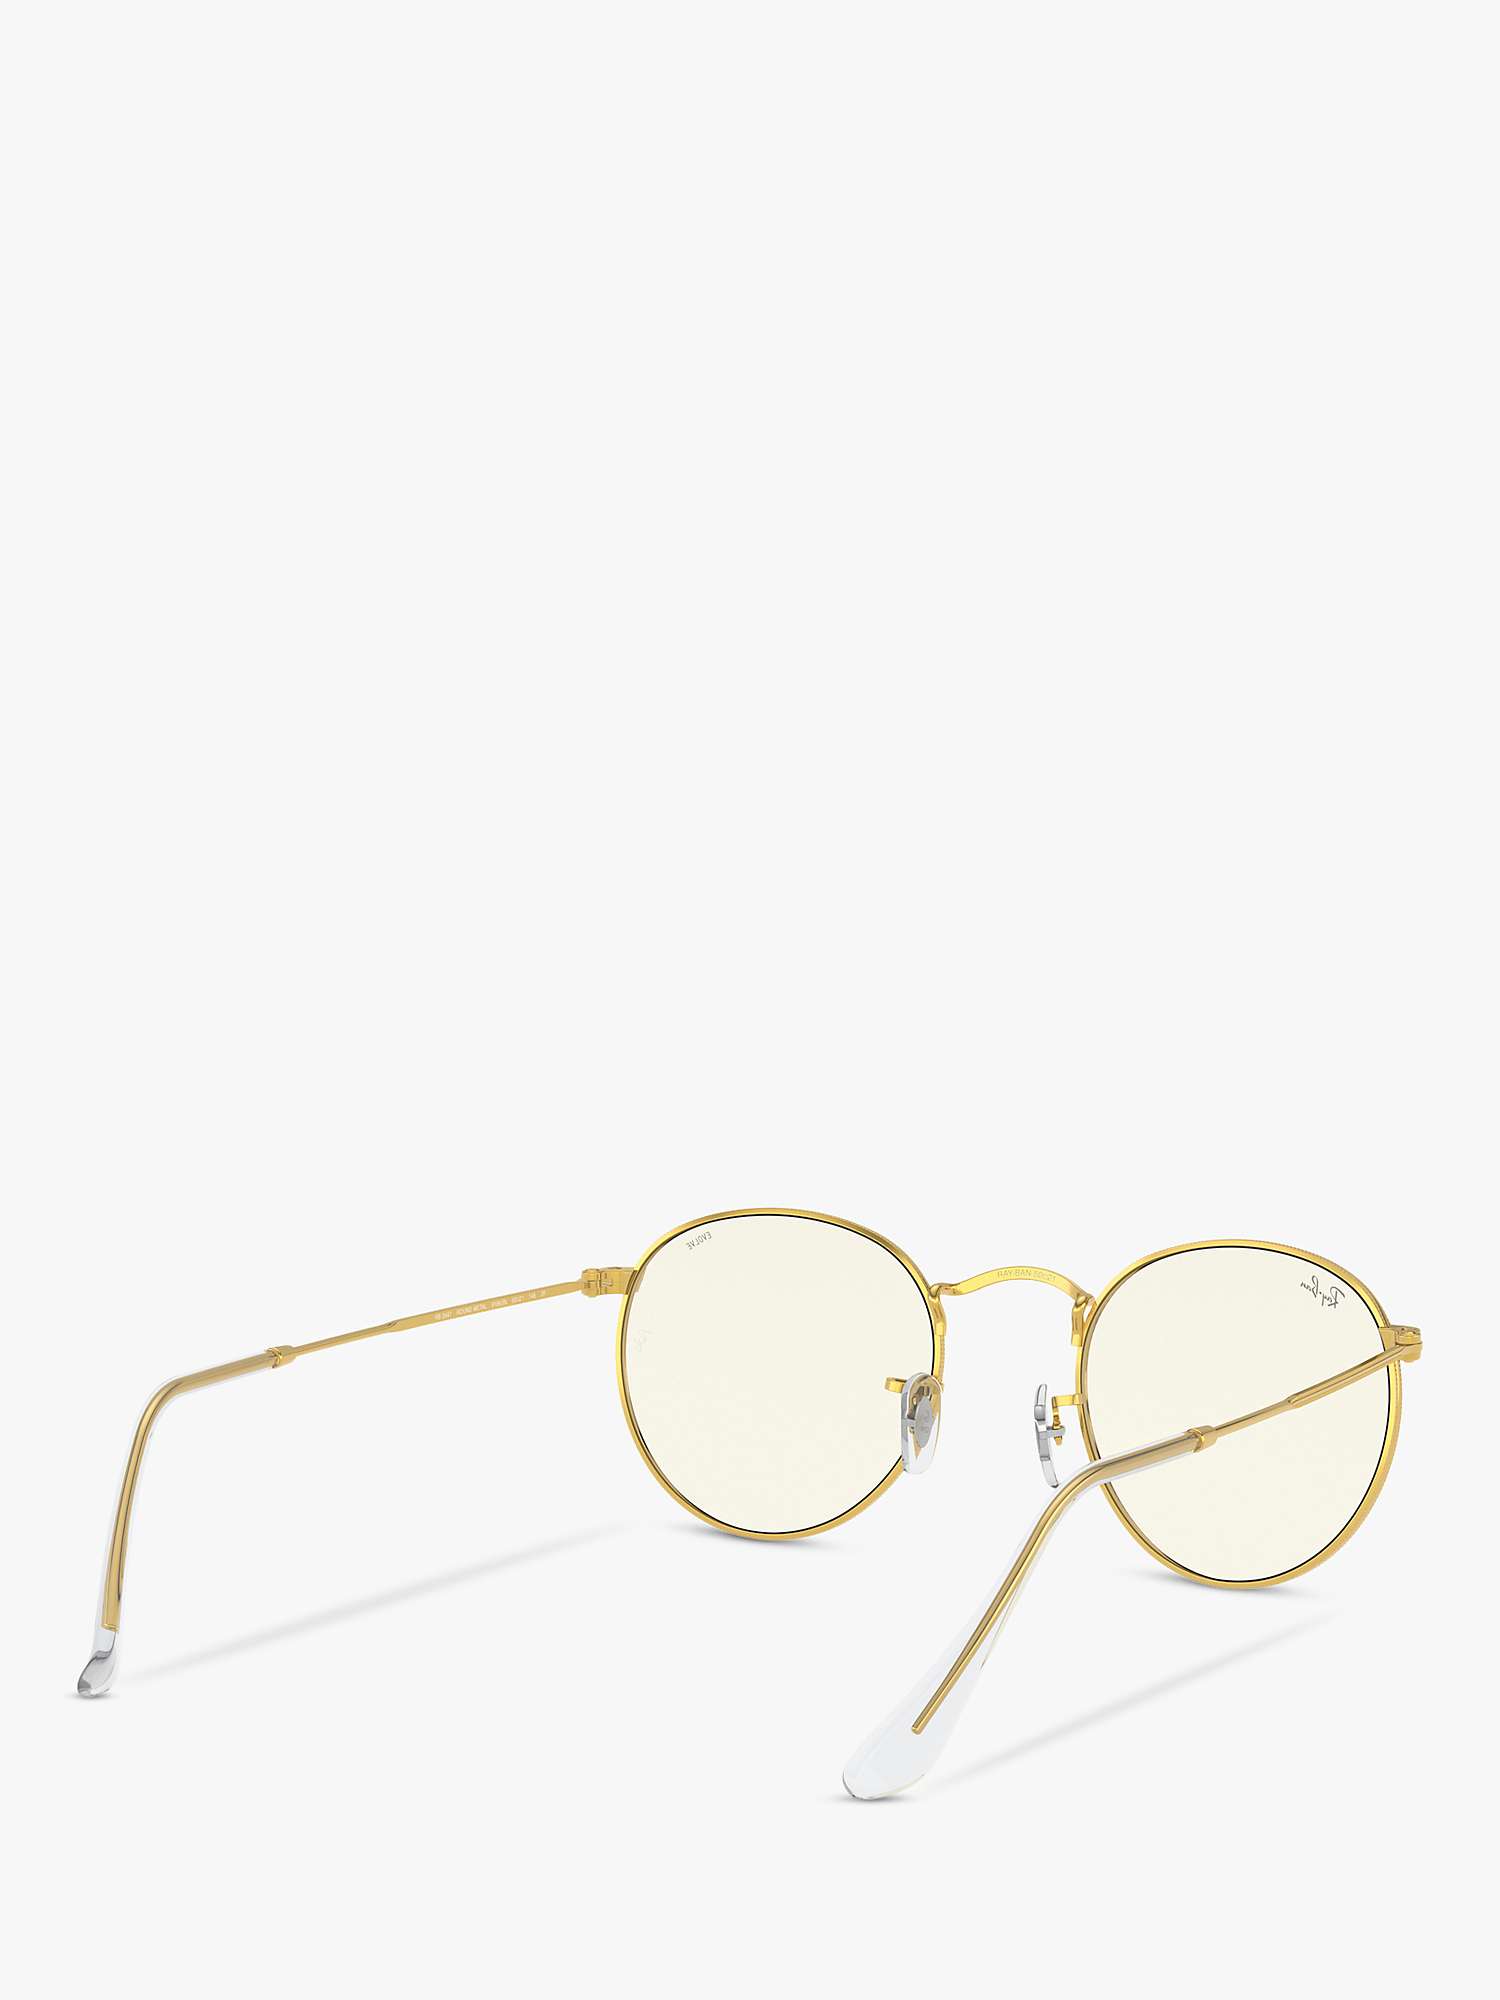 Buy Ray-Ban RB3447 Women's Round Metal Sunglasses, Gold Online at johnlewis.com